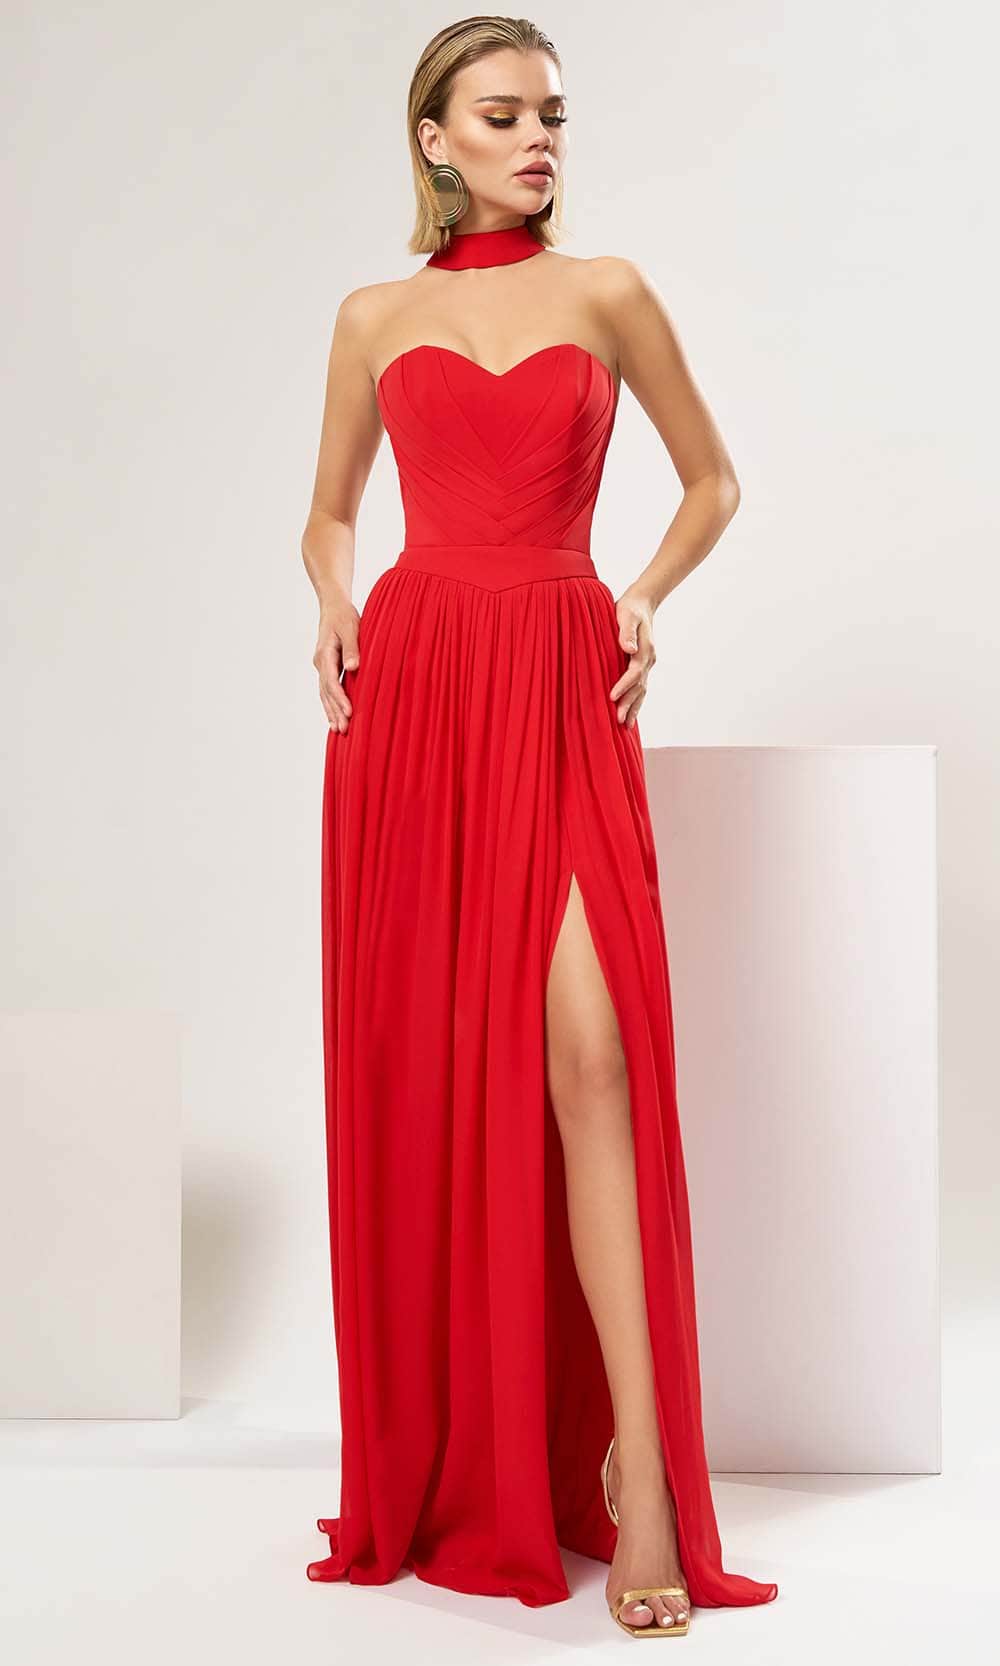 Image of Cristallini Amore CA26 - Sweetheart Cutout Back Evening Gown